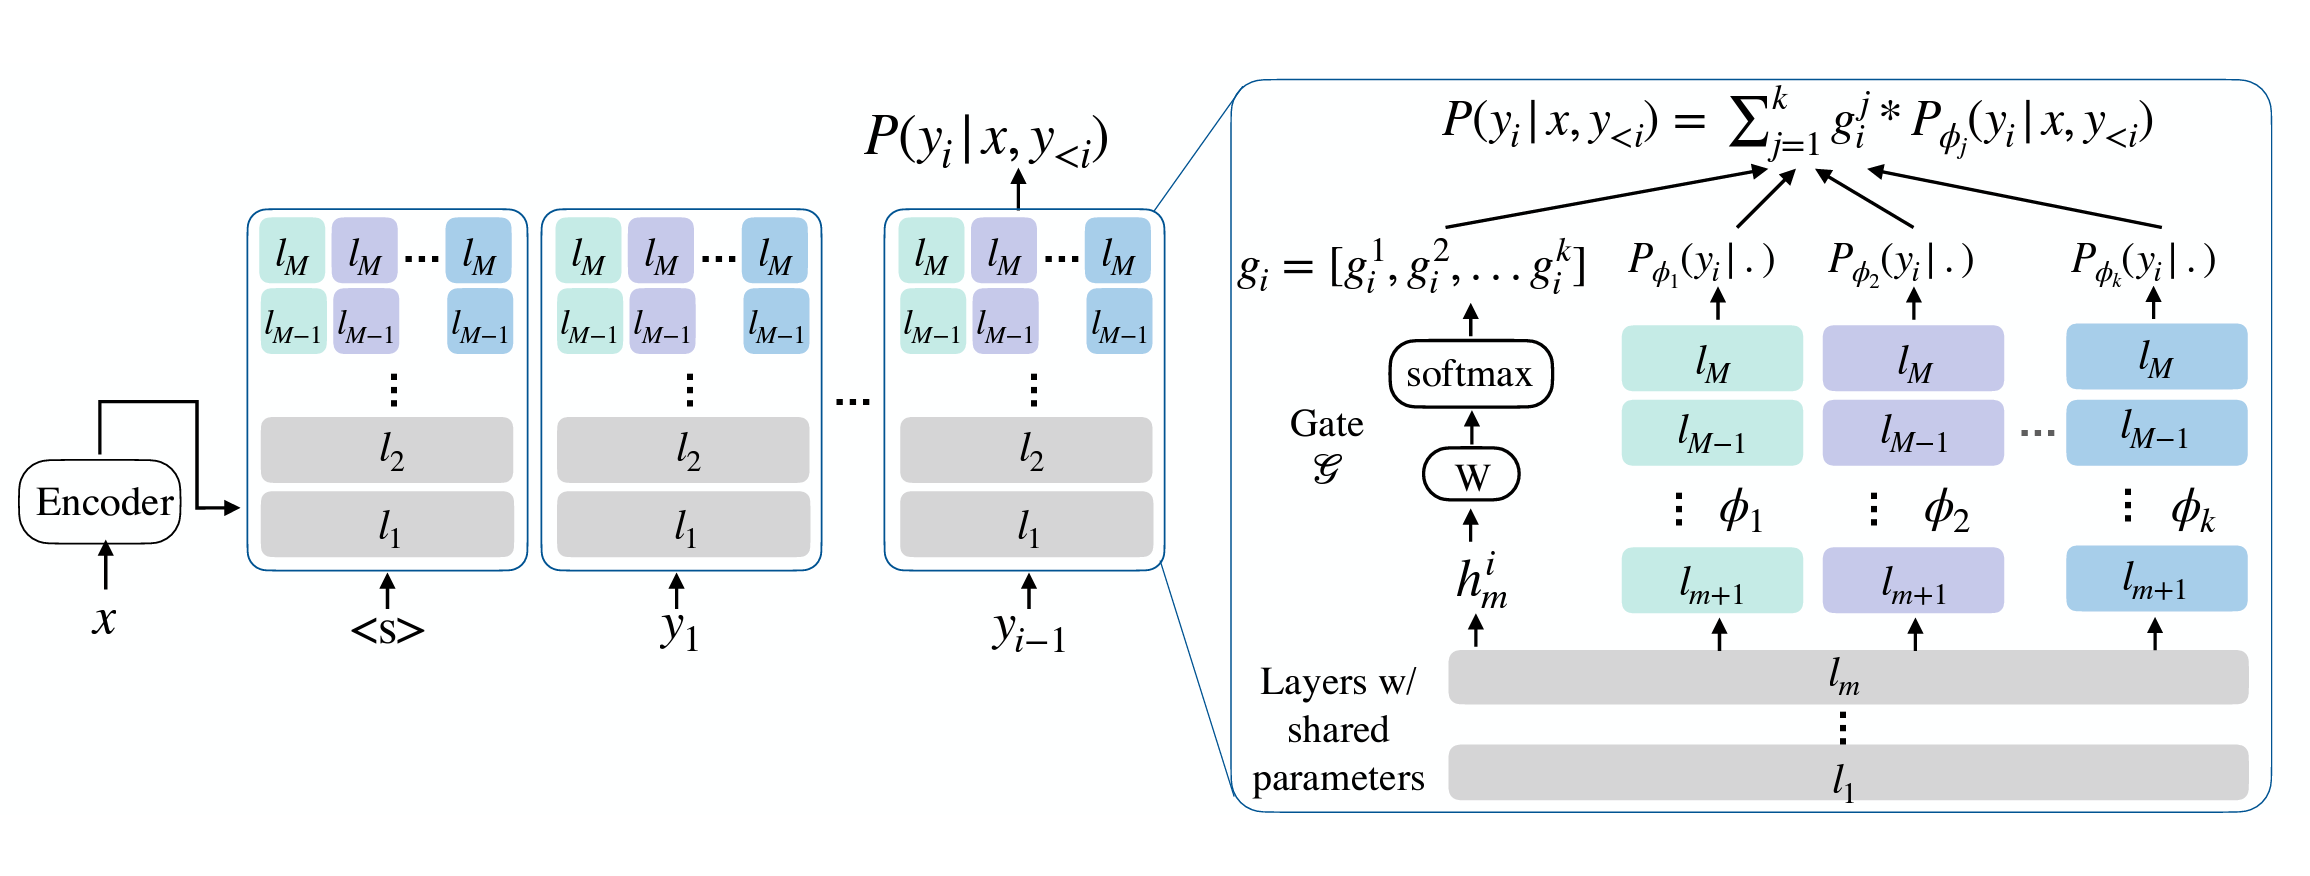 HydraSum: Disentangling Stylistic Features in Text Summarization (Paper Review/Described)